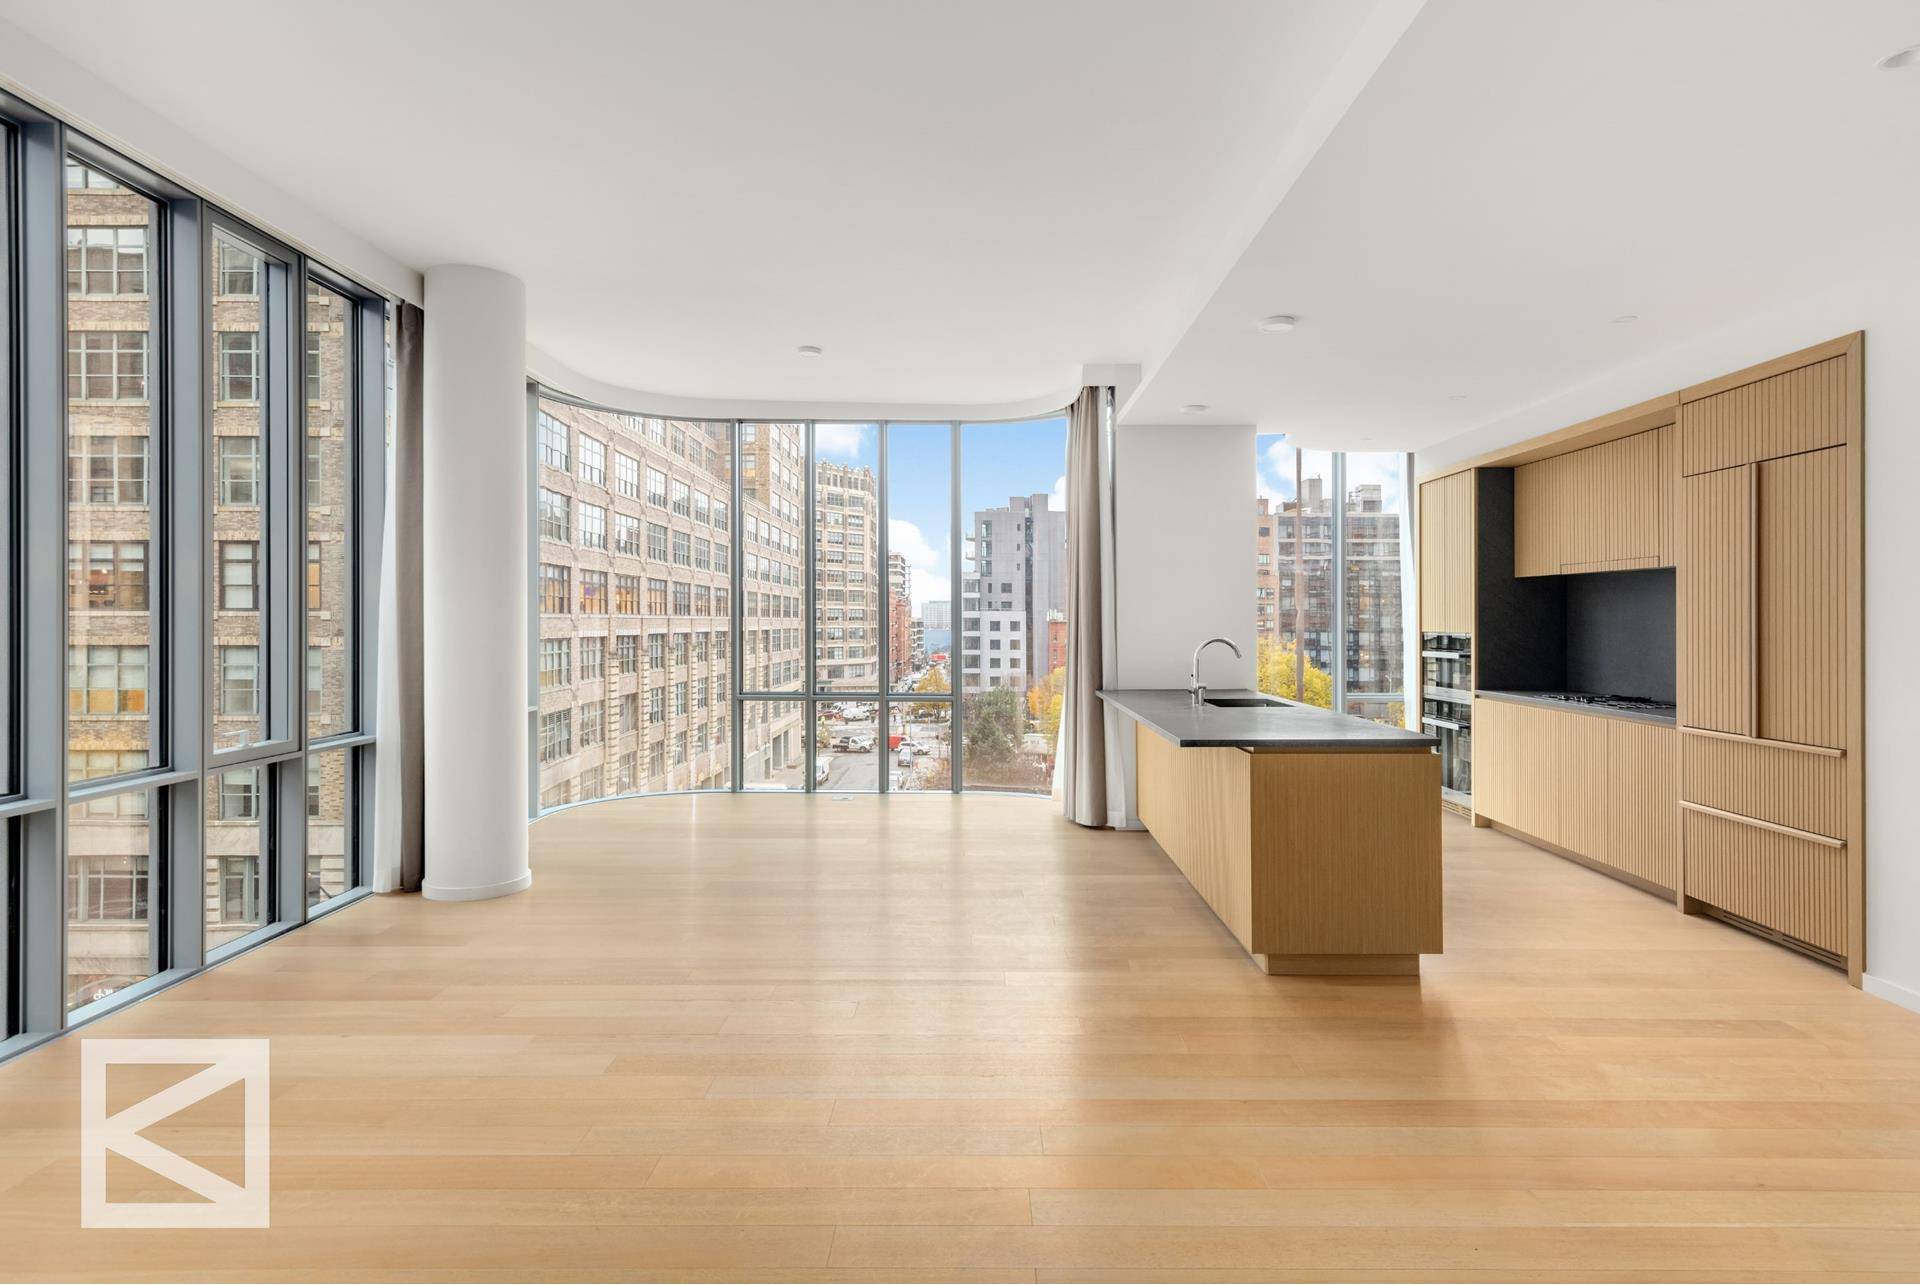 Architect Renzo Piano's first residential project in New York City presents a new vision in the landscape of downtown and Soho.